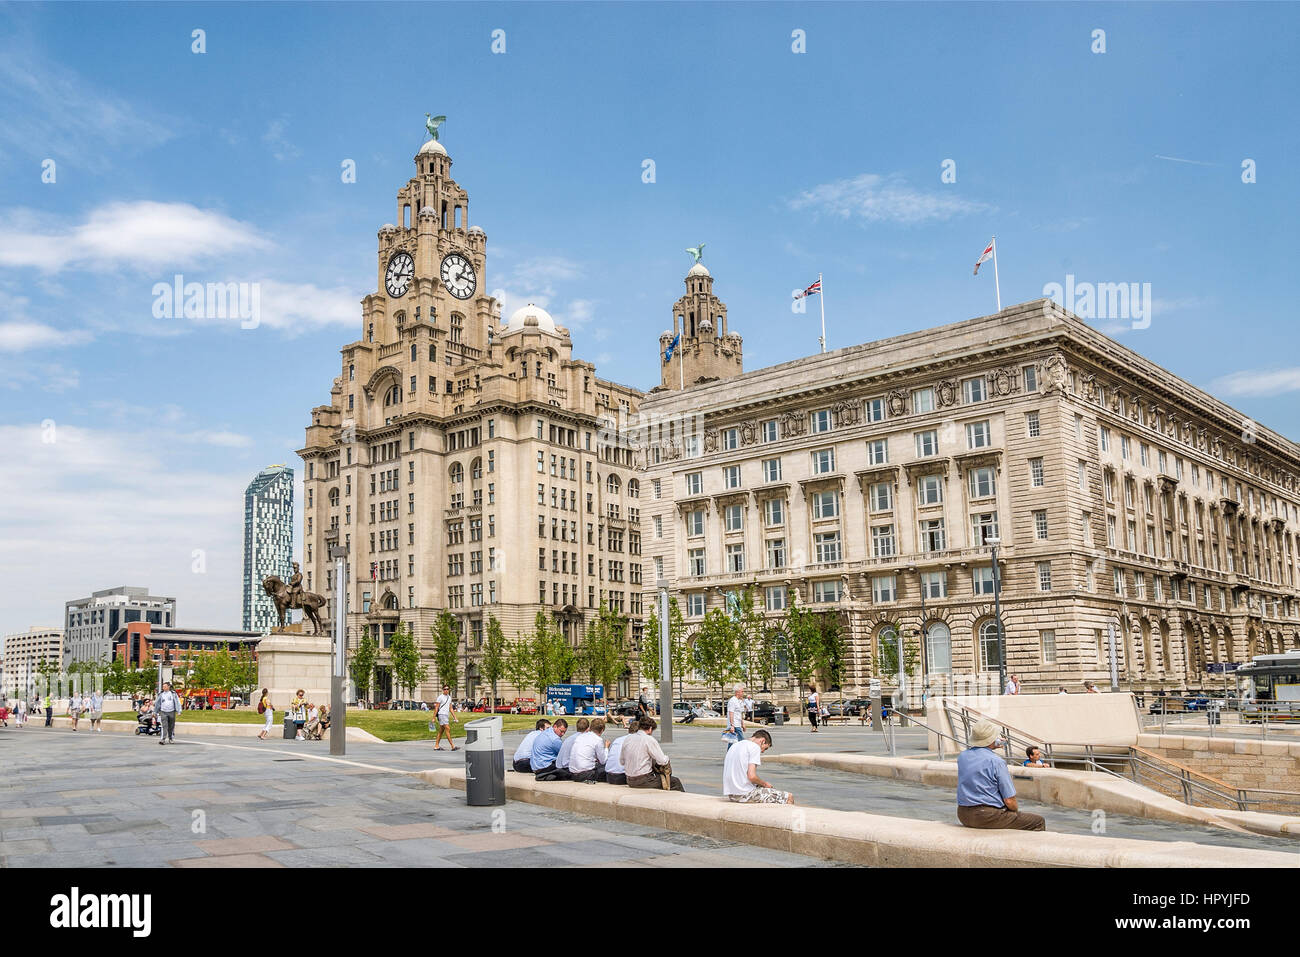 The historic Pier Head riverfront site  in the city centre of Liverpool, England. It encompasses a trio of landmarks, built on the site of the former  Stock Photo